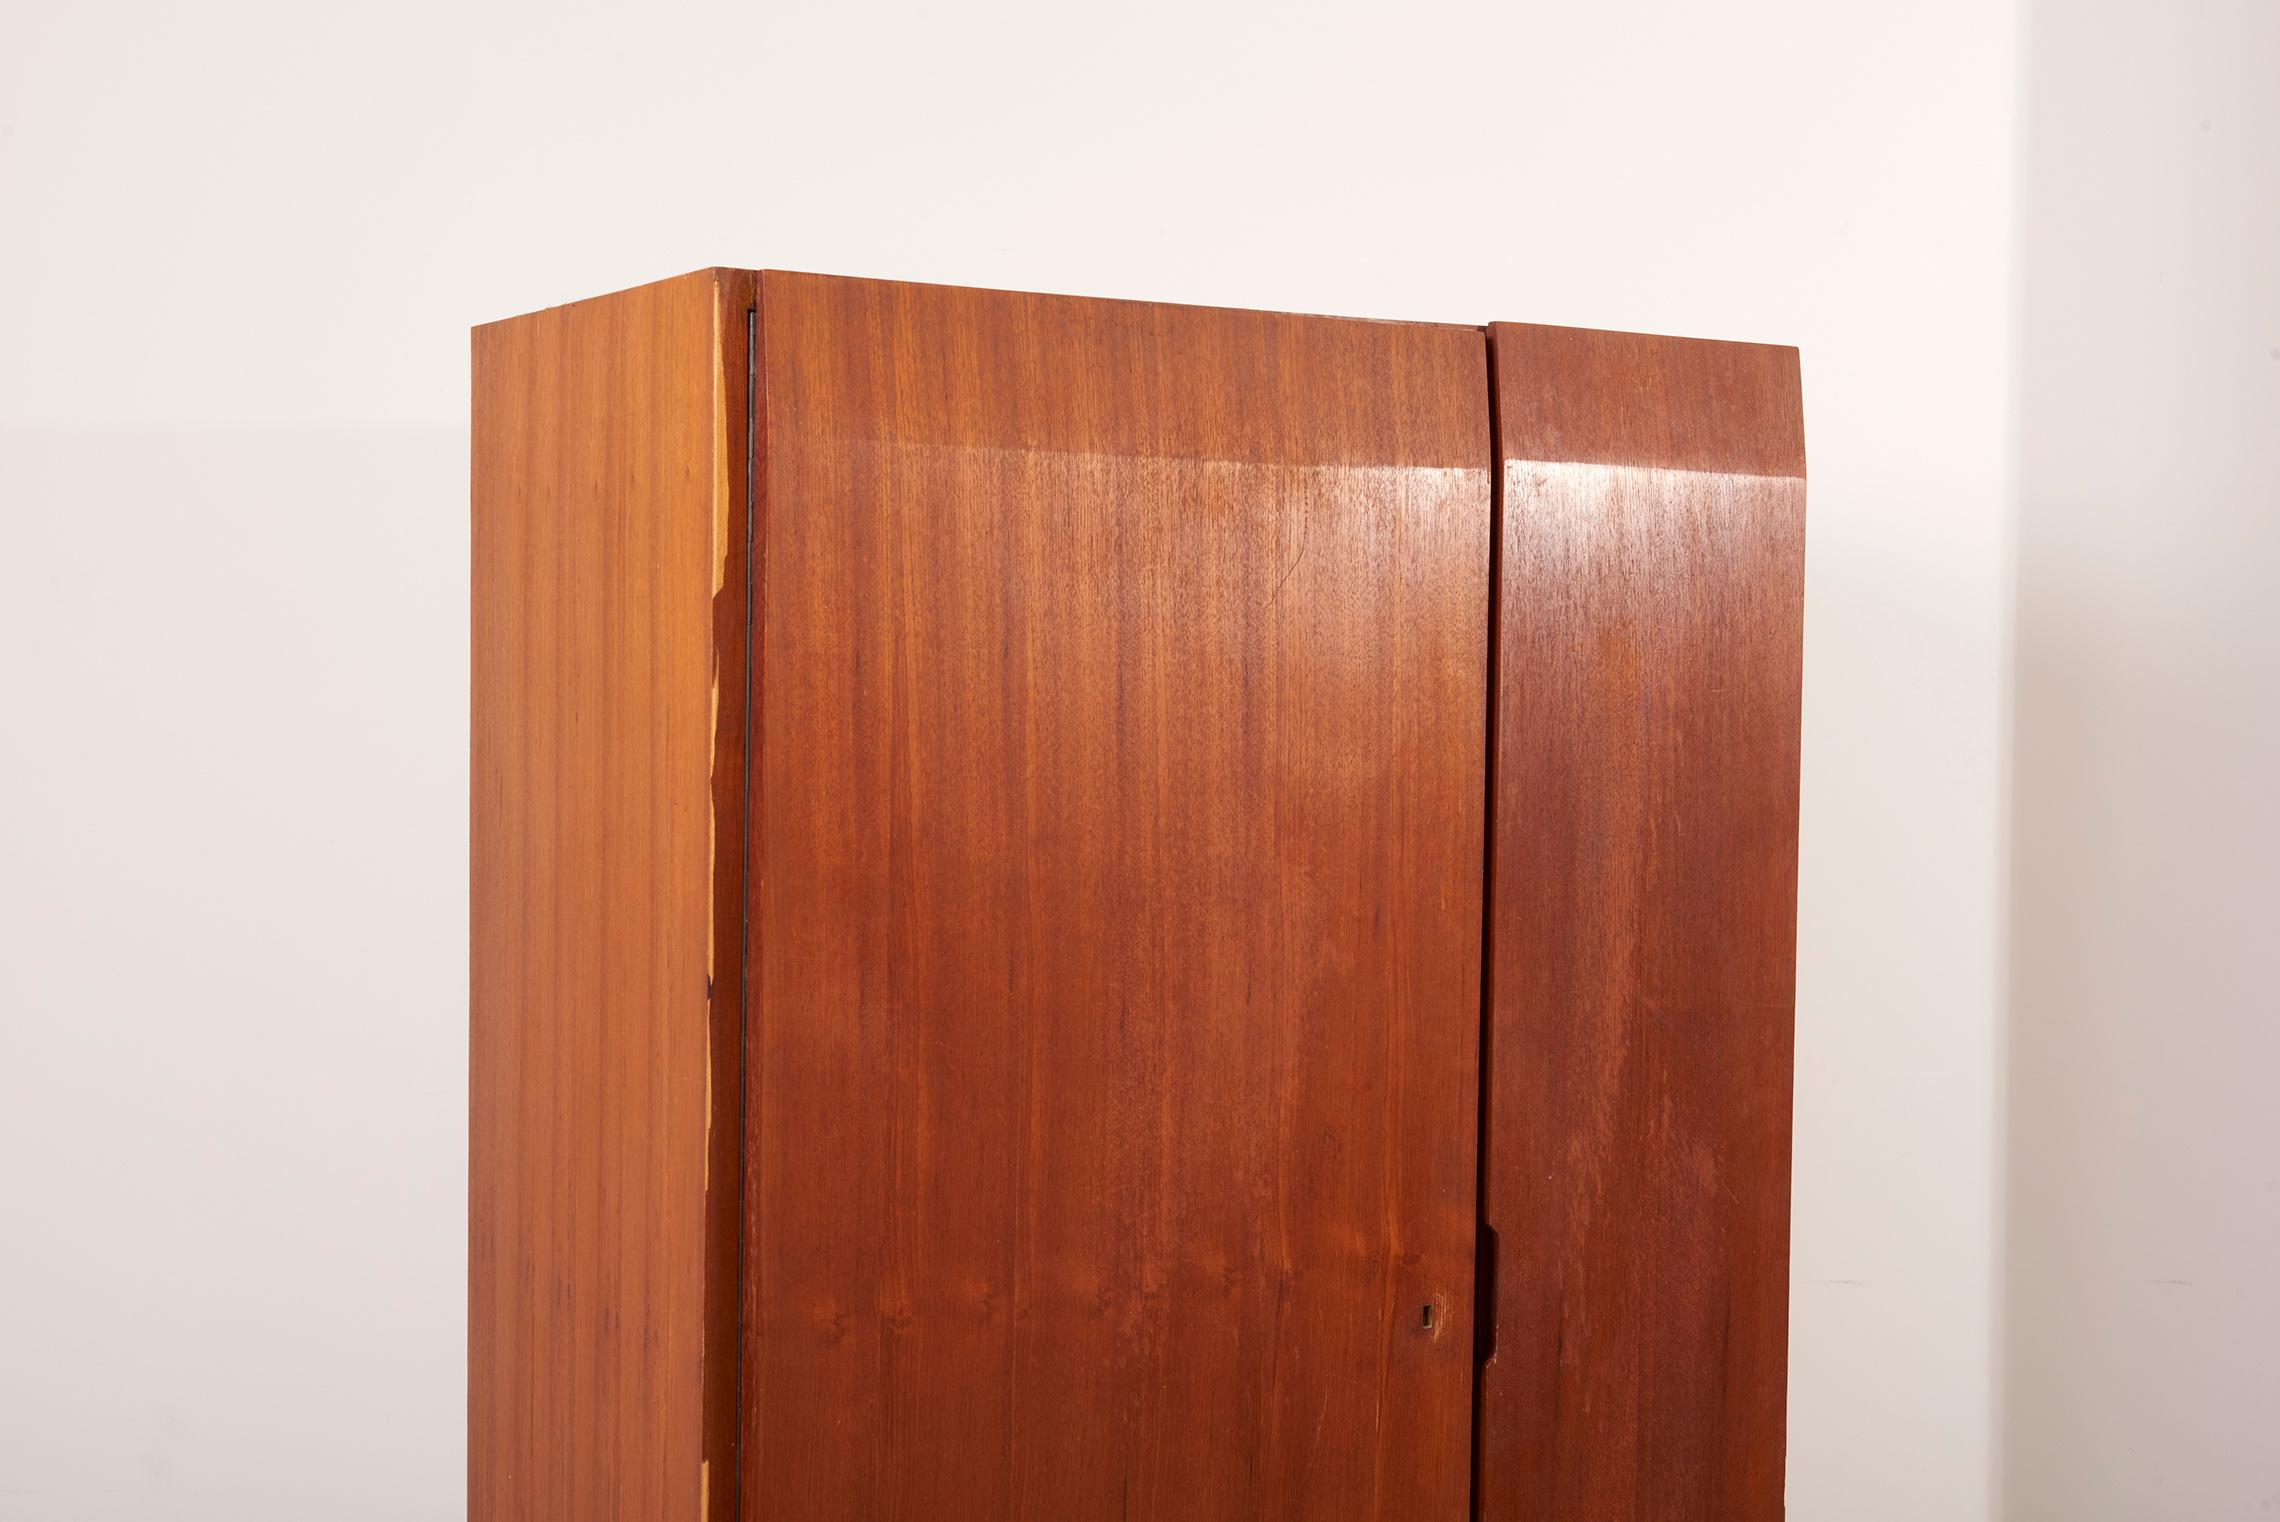 Architectural Wooden Cabinet, Italy, 1950s For Sale 5